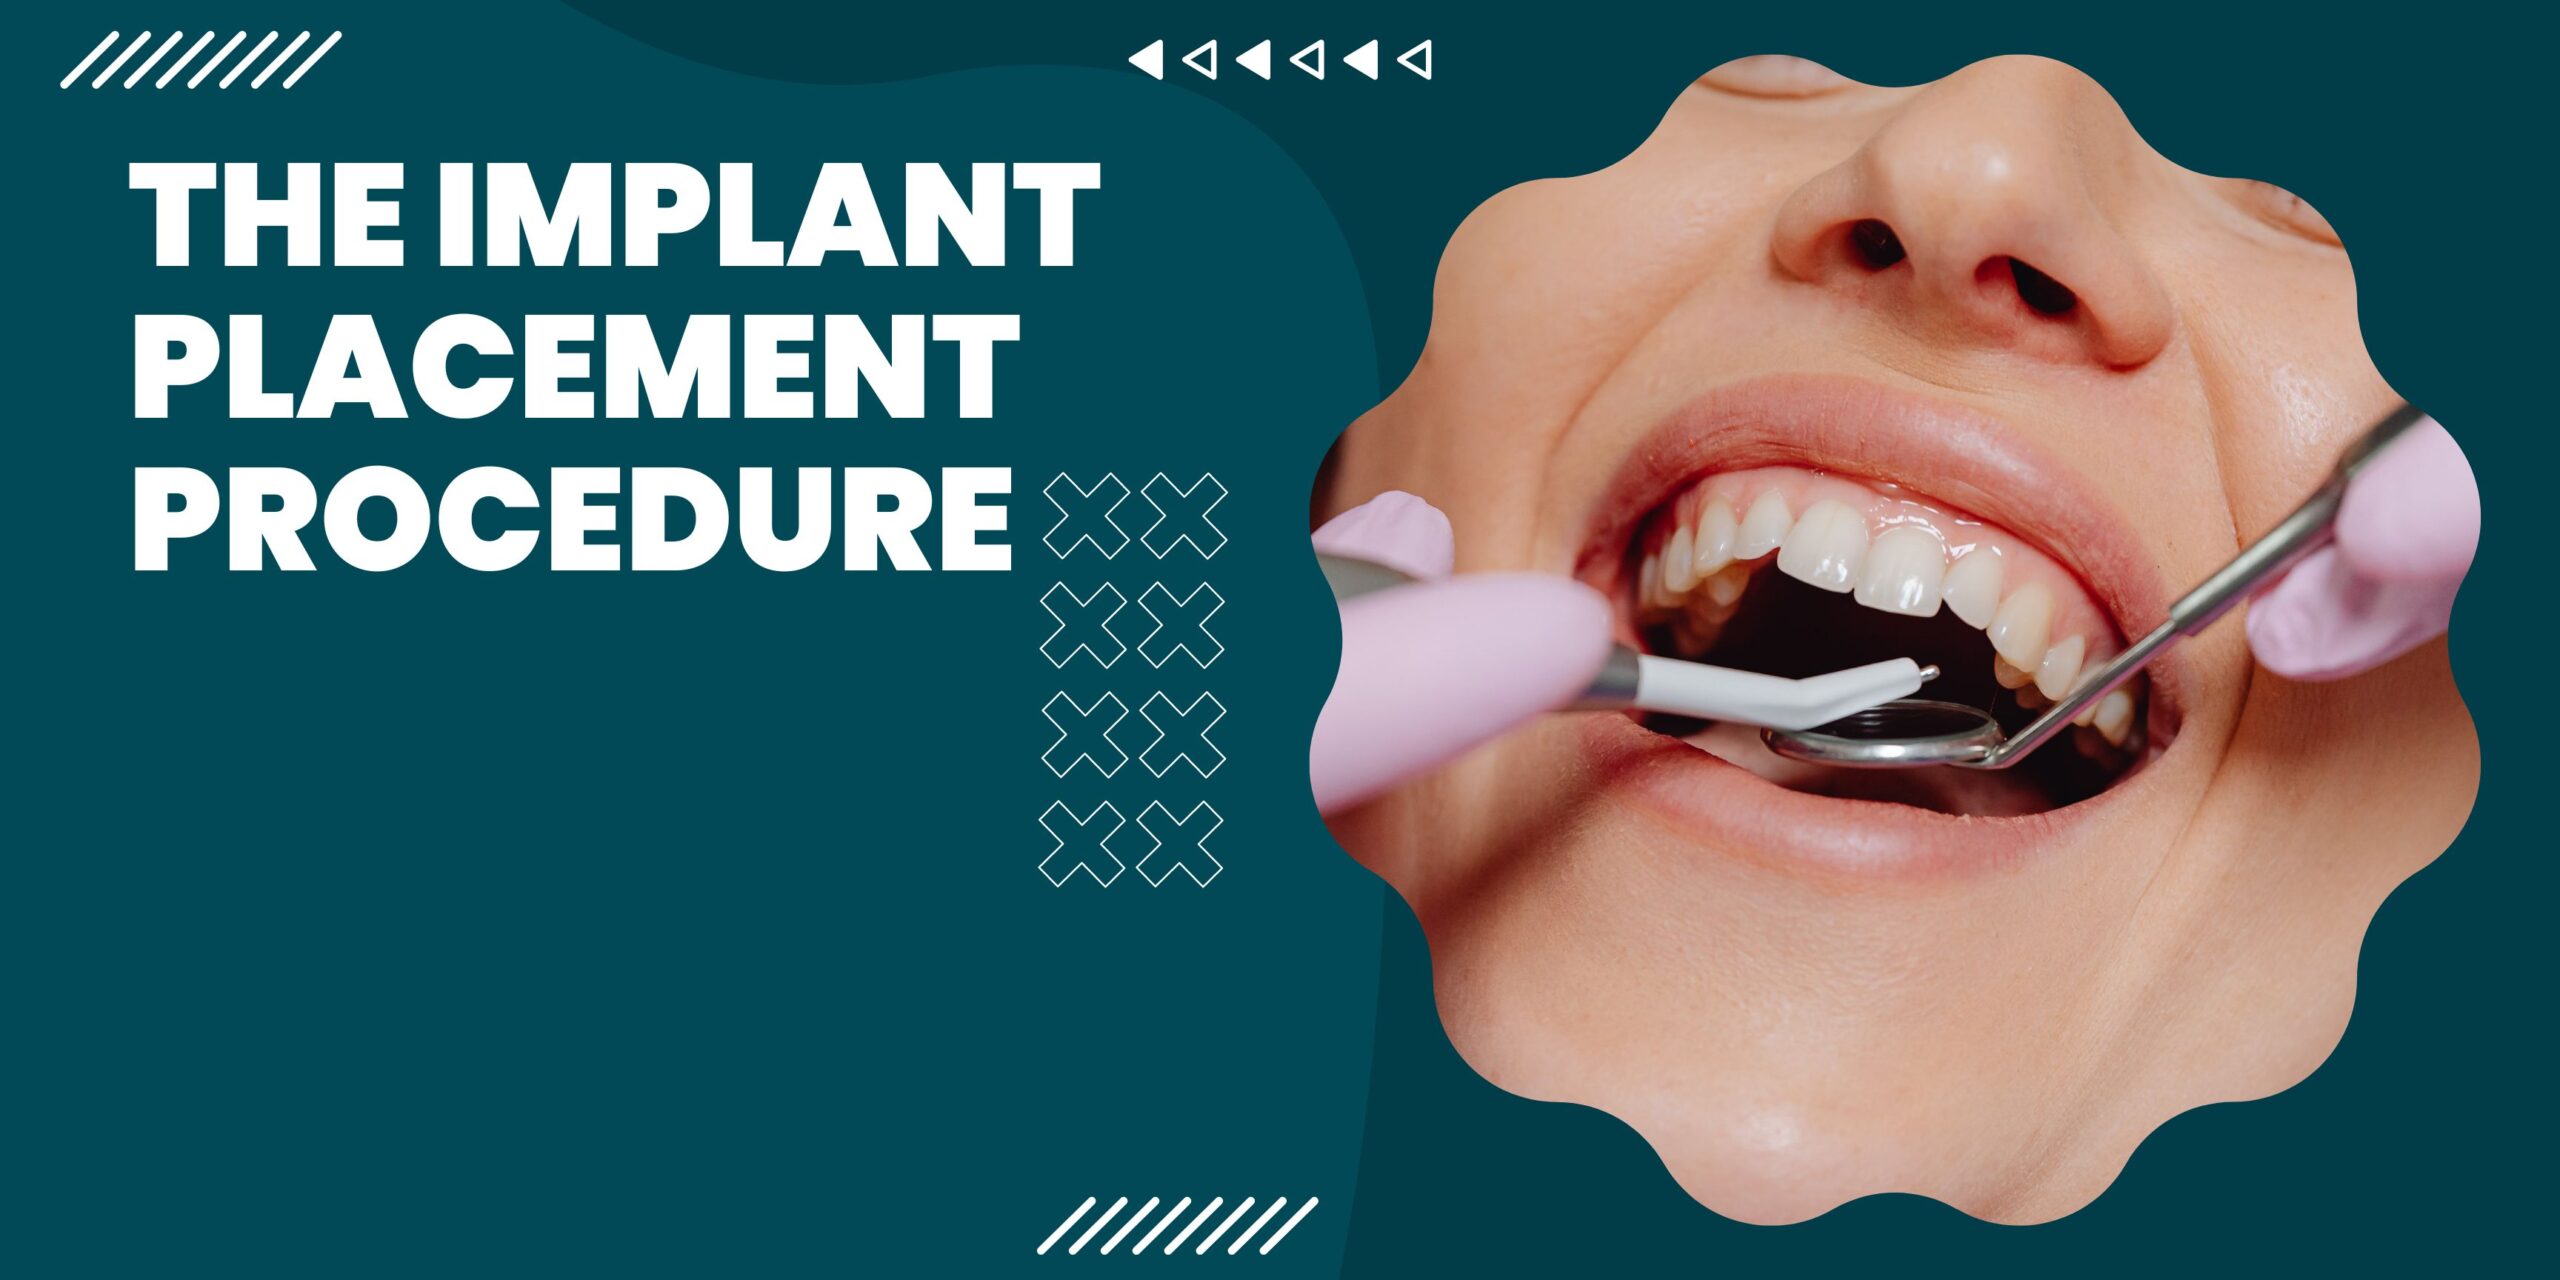 The Implant Placement Procedure